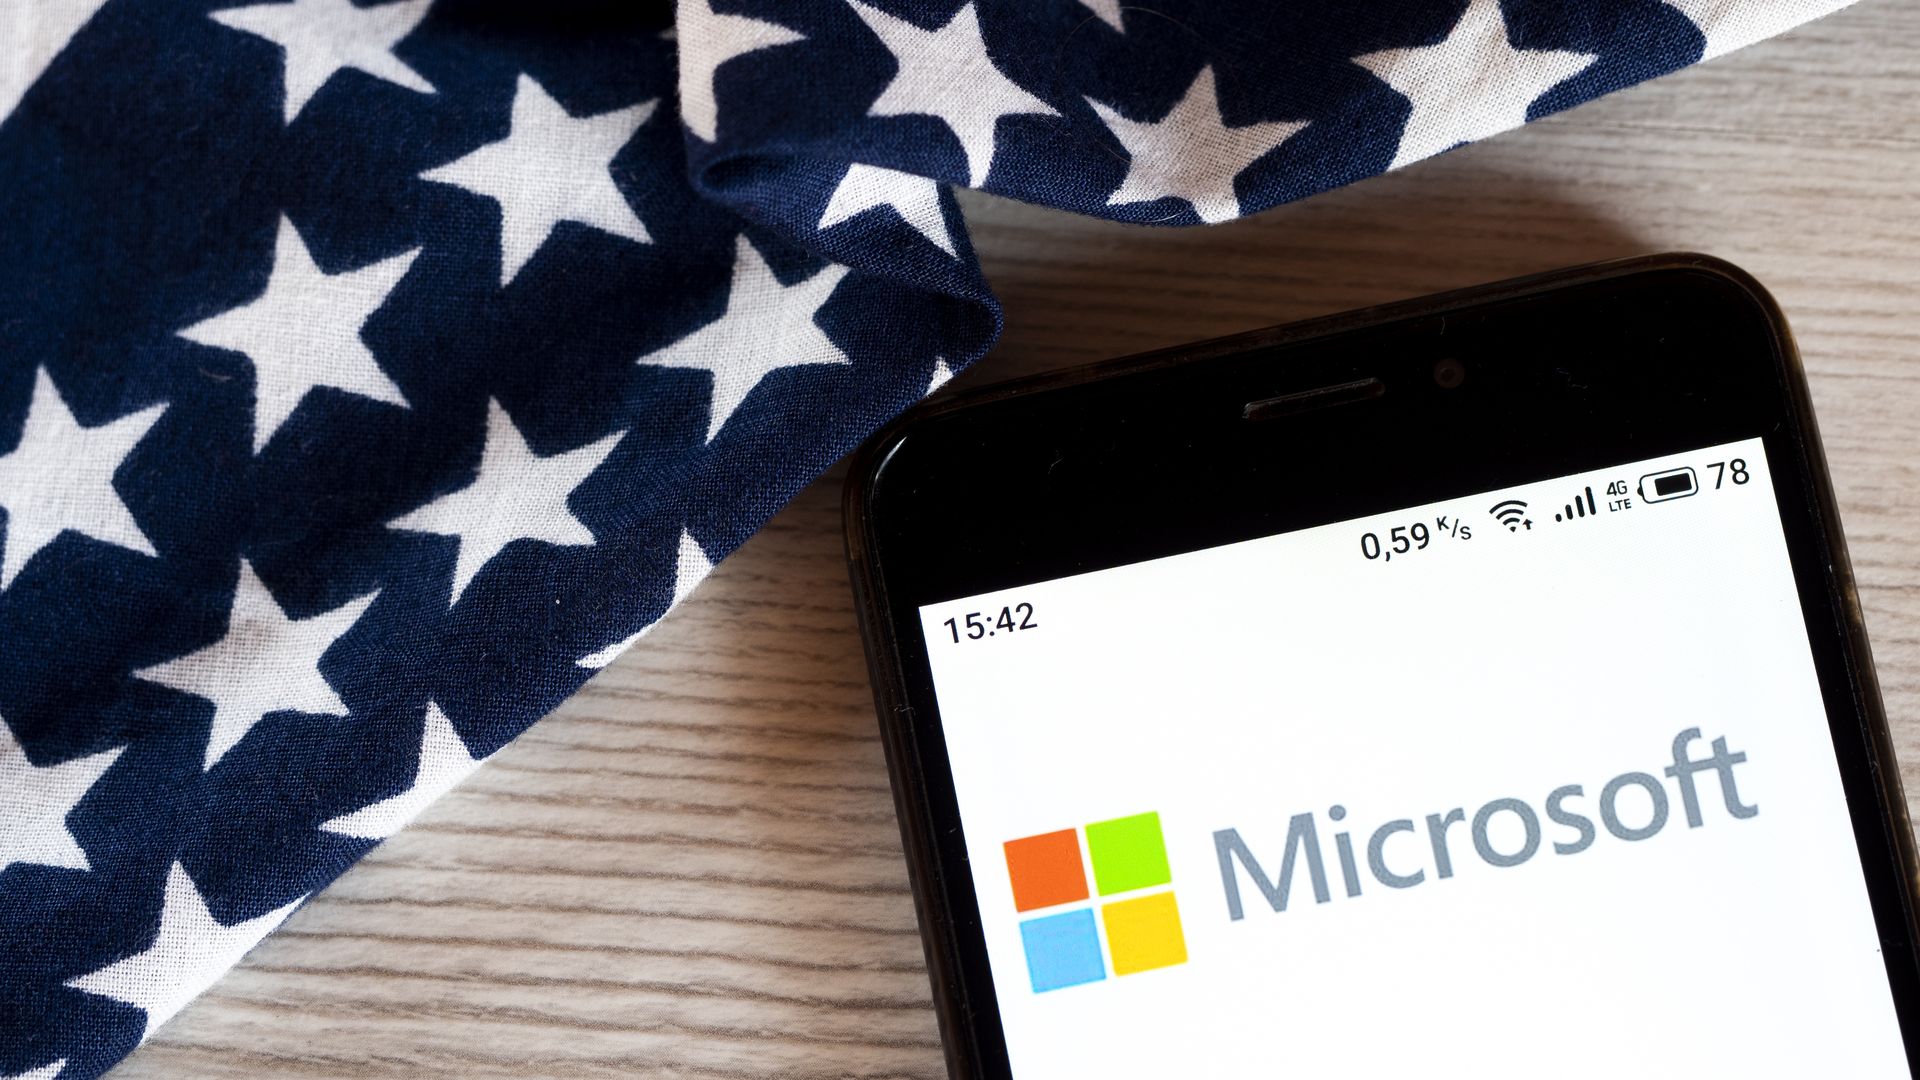 A photo of a smartphone displaying the Microsoft logo, with the American flag behind it